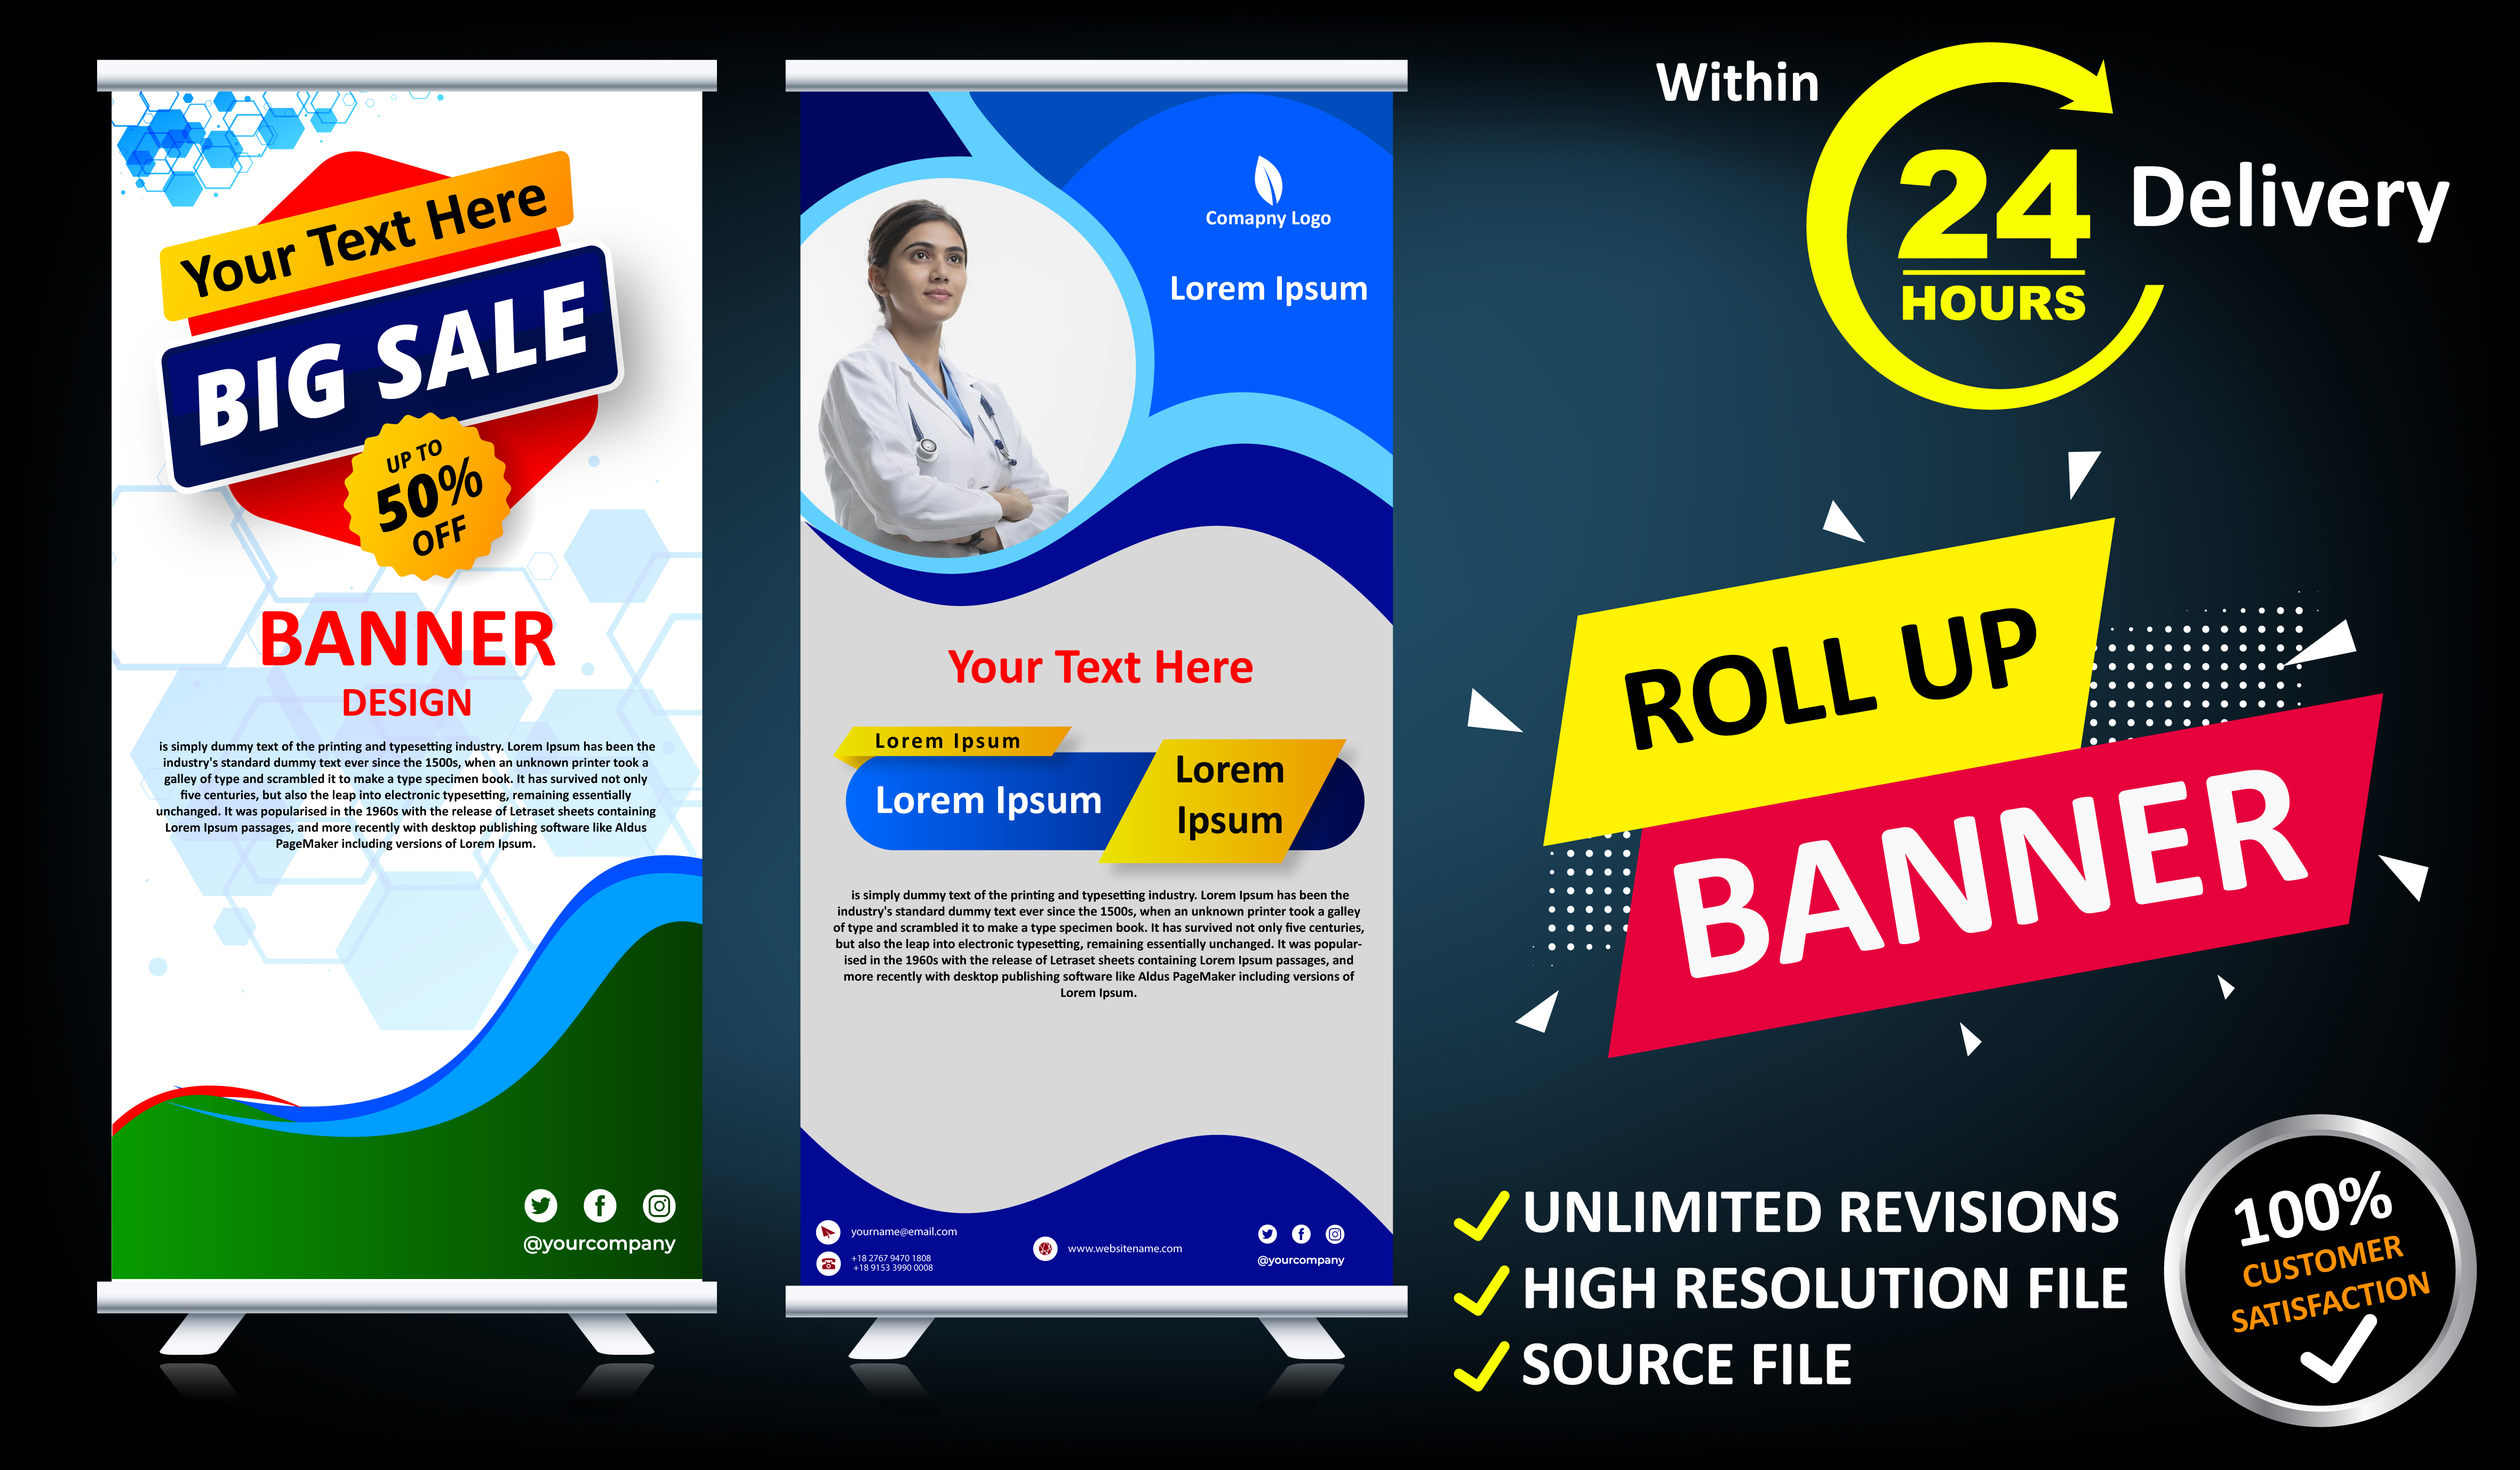 Design Any Banner, Cover, Billboard or Roll up Within 24 Hours